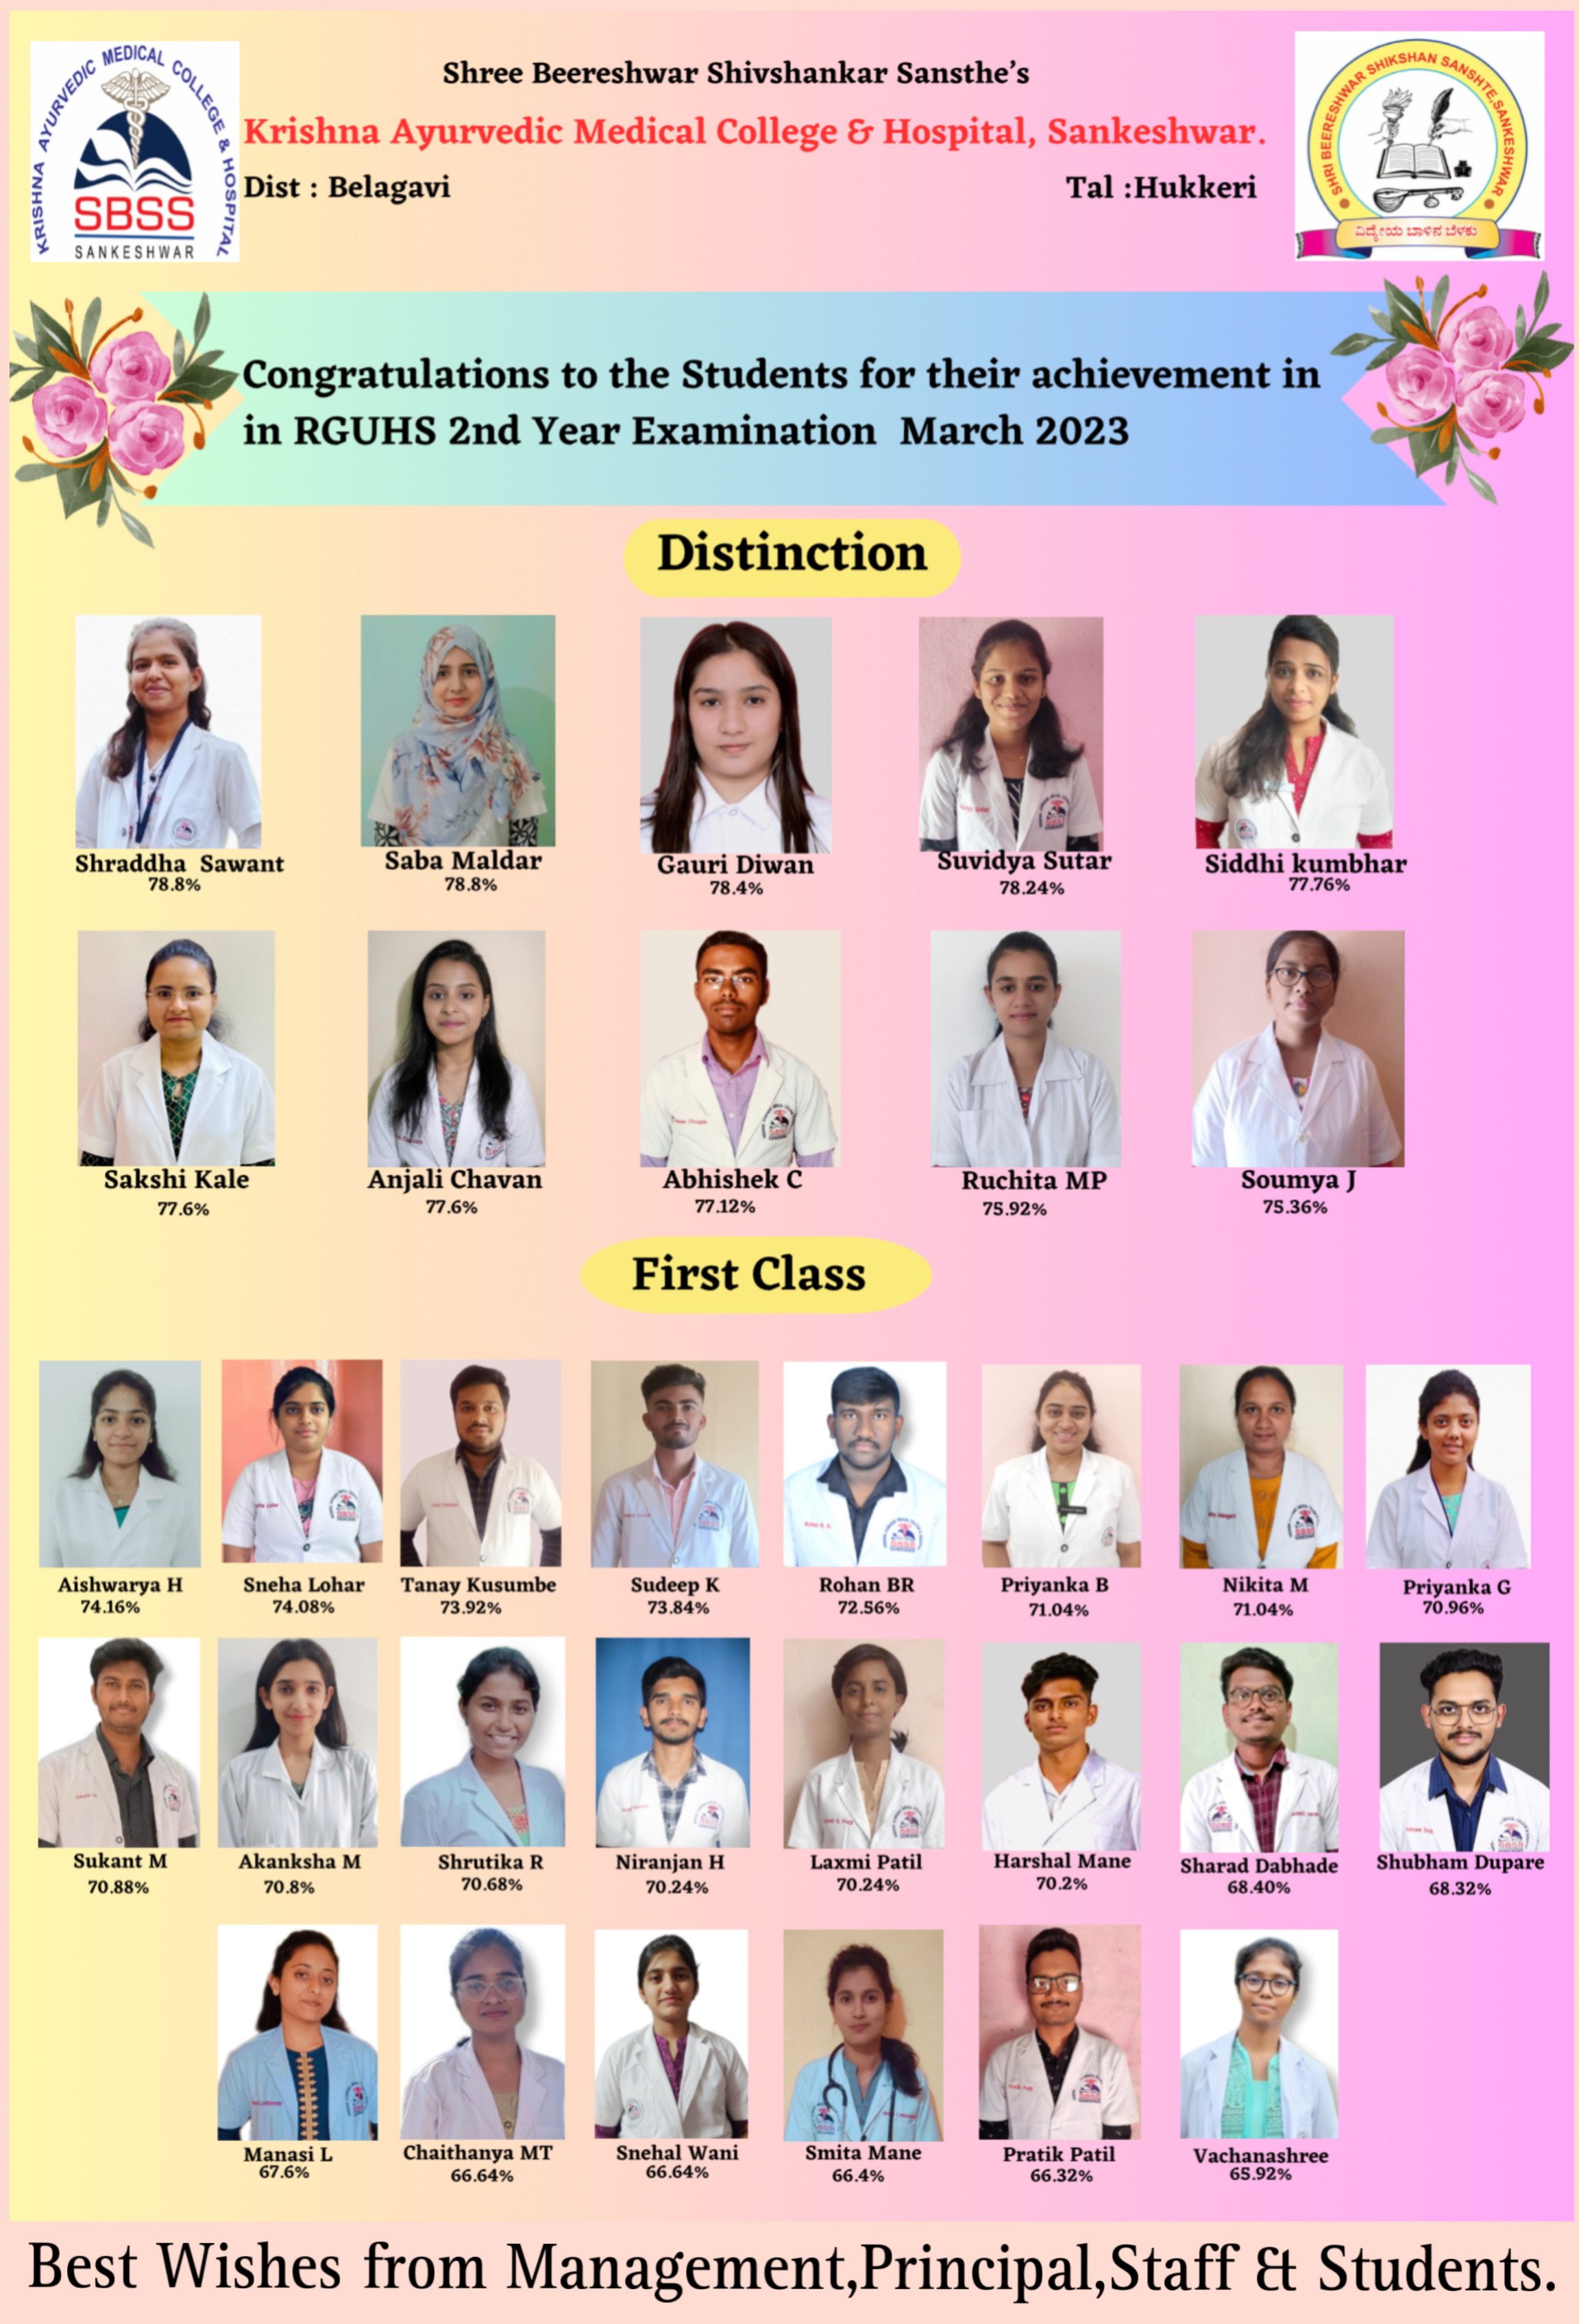 Congratulations to the students for their excellent performance in 2nd year RGUHS Examinations-March 2023 